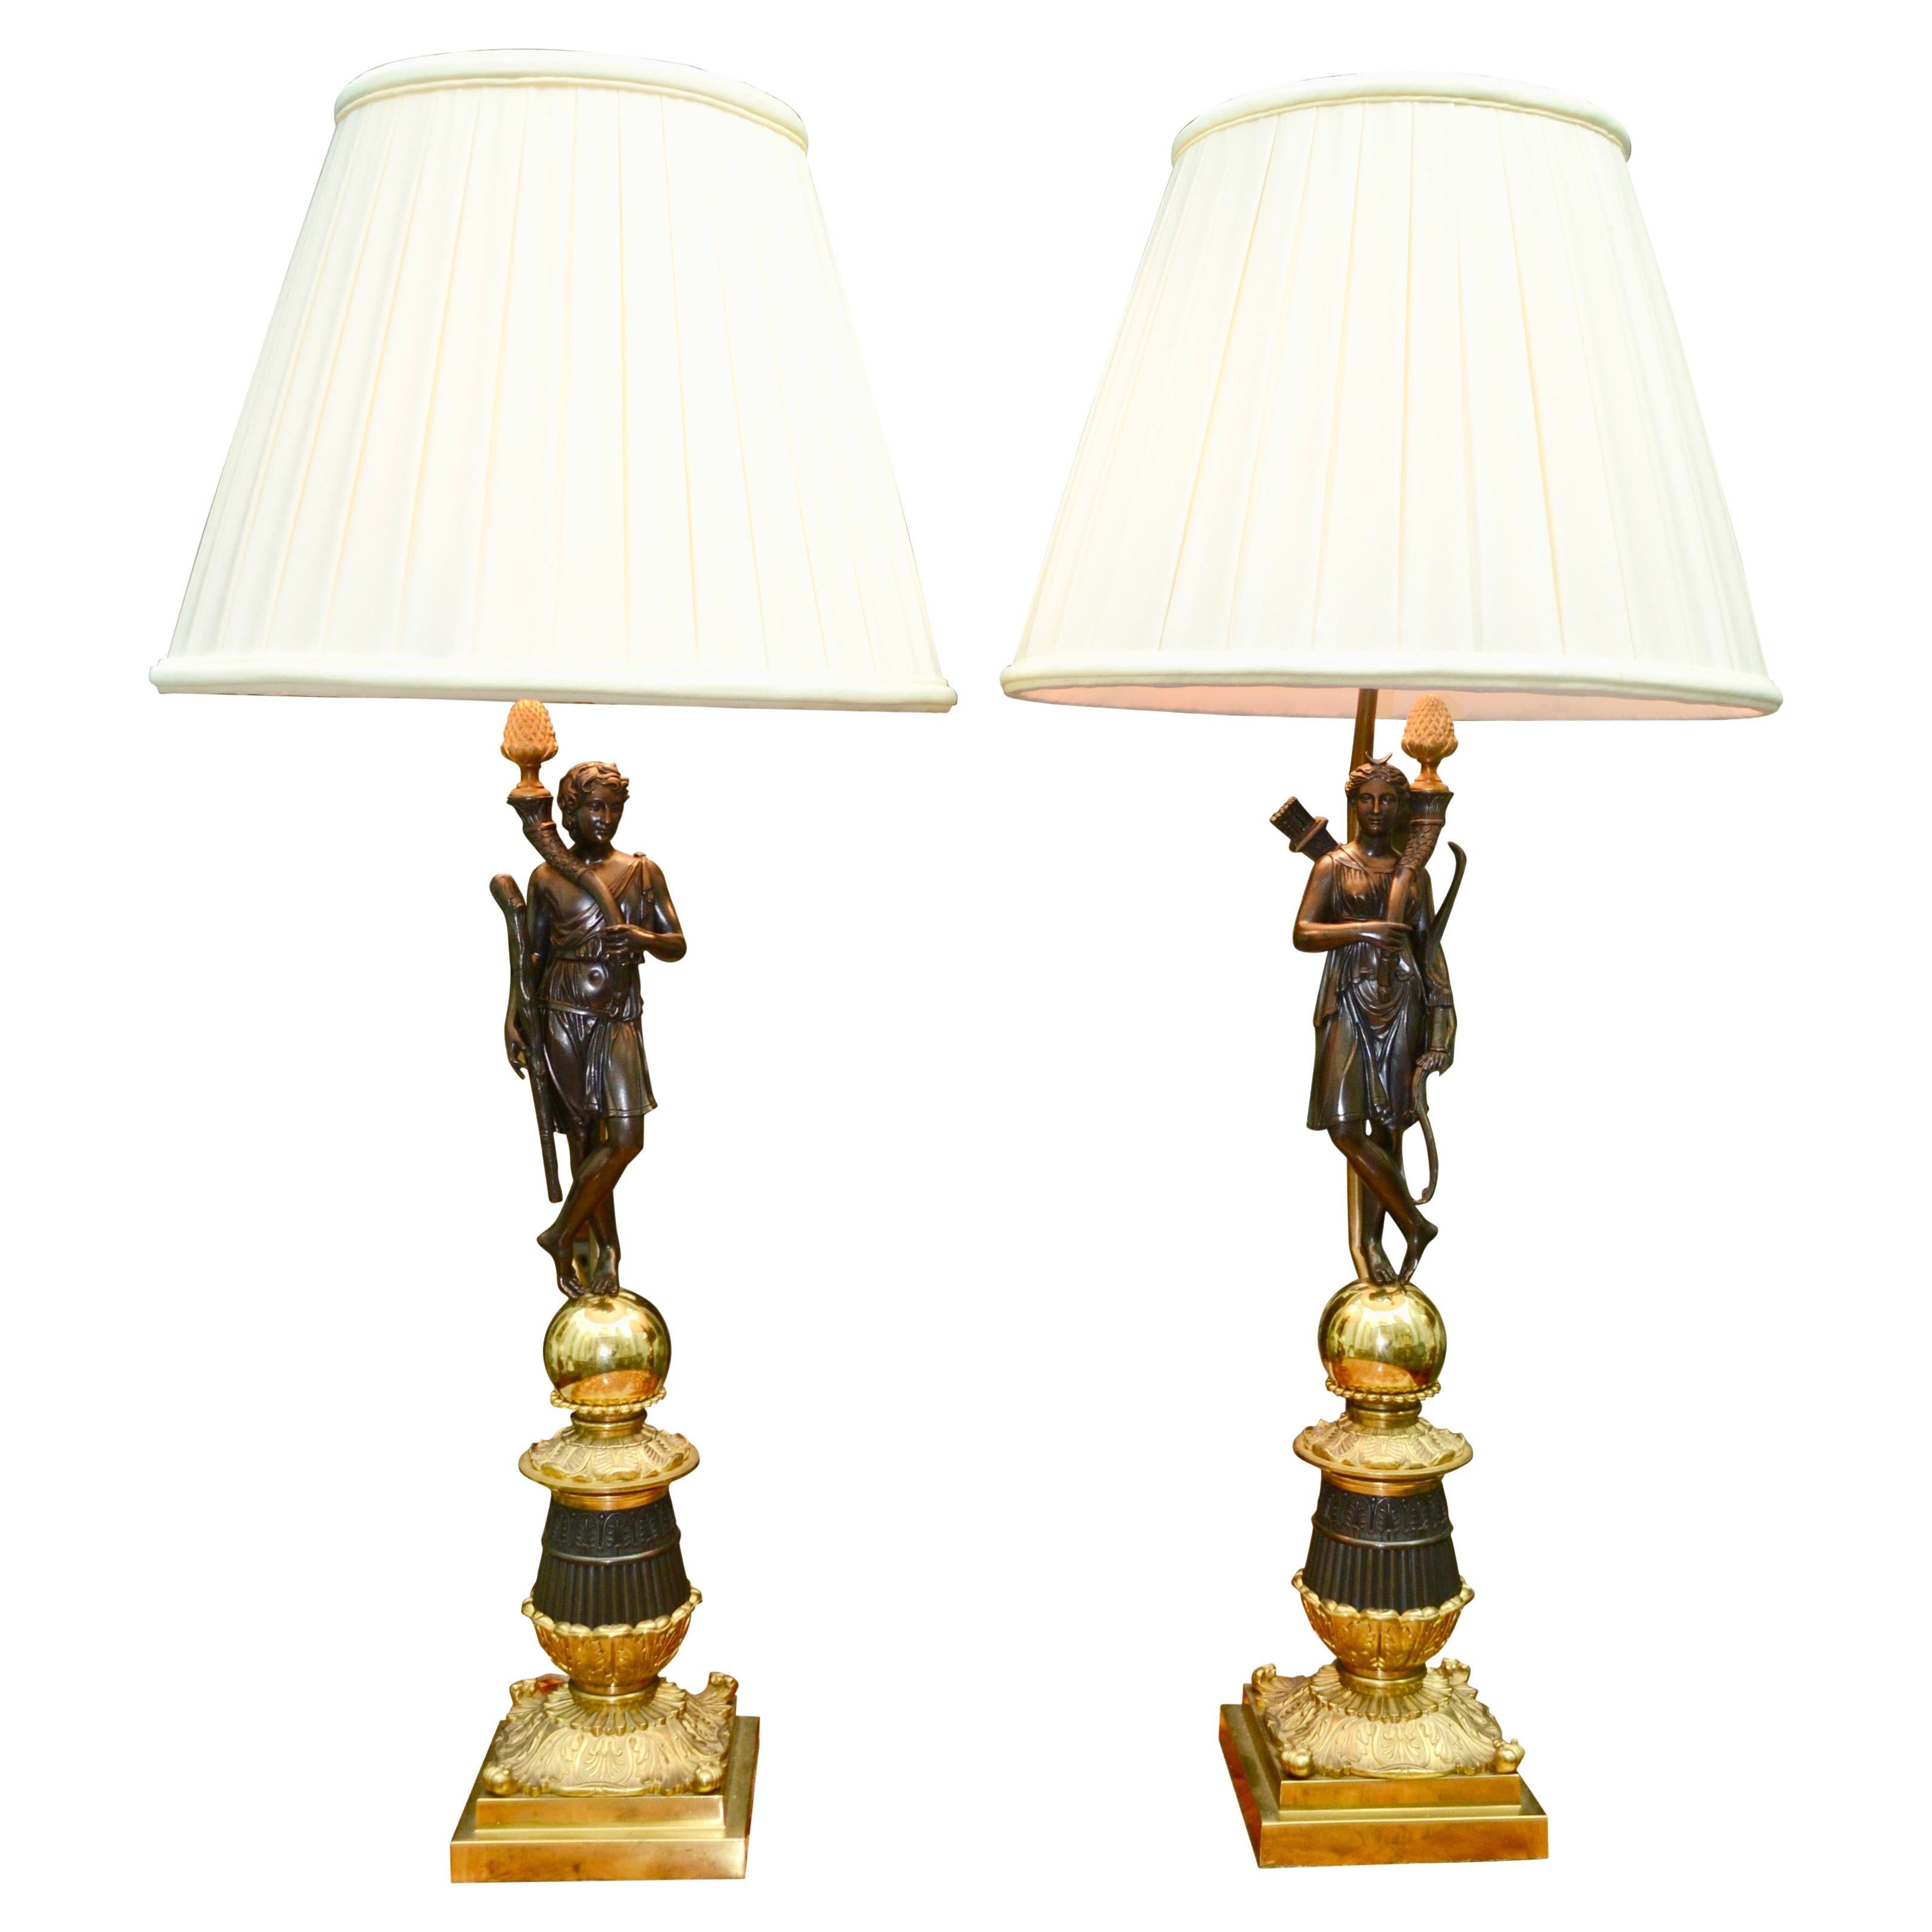 Pair of French 19 Century Neoclassical Figurative Bronze Lamps For Sale